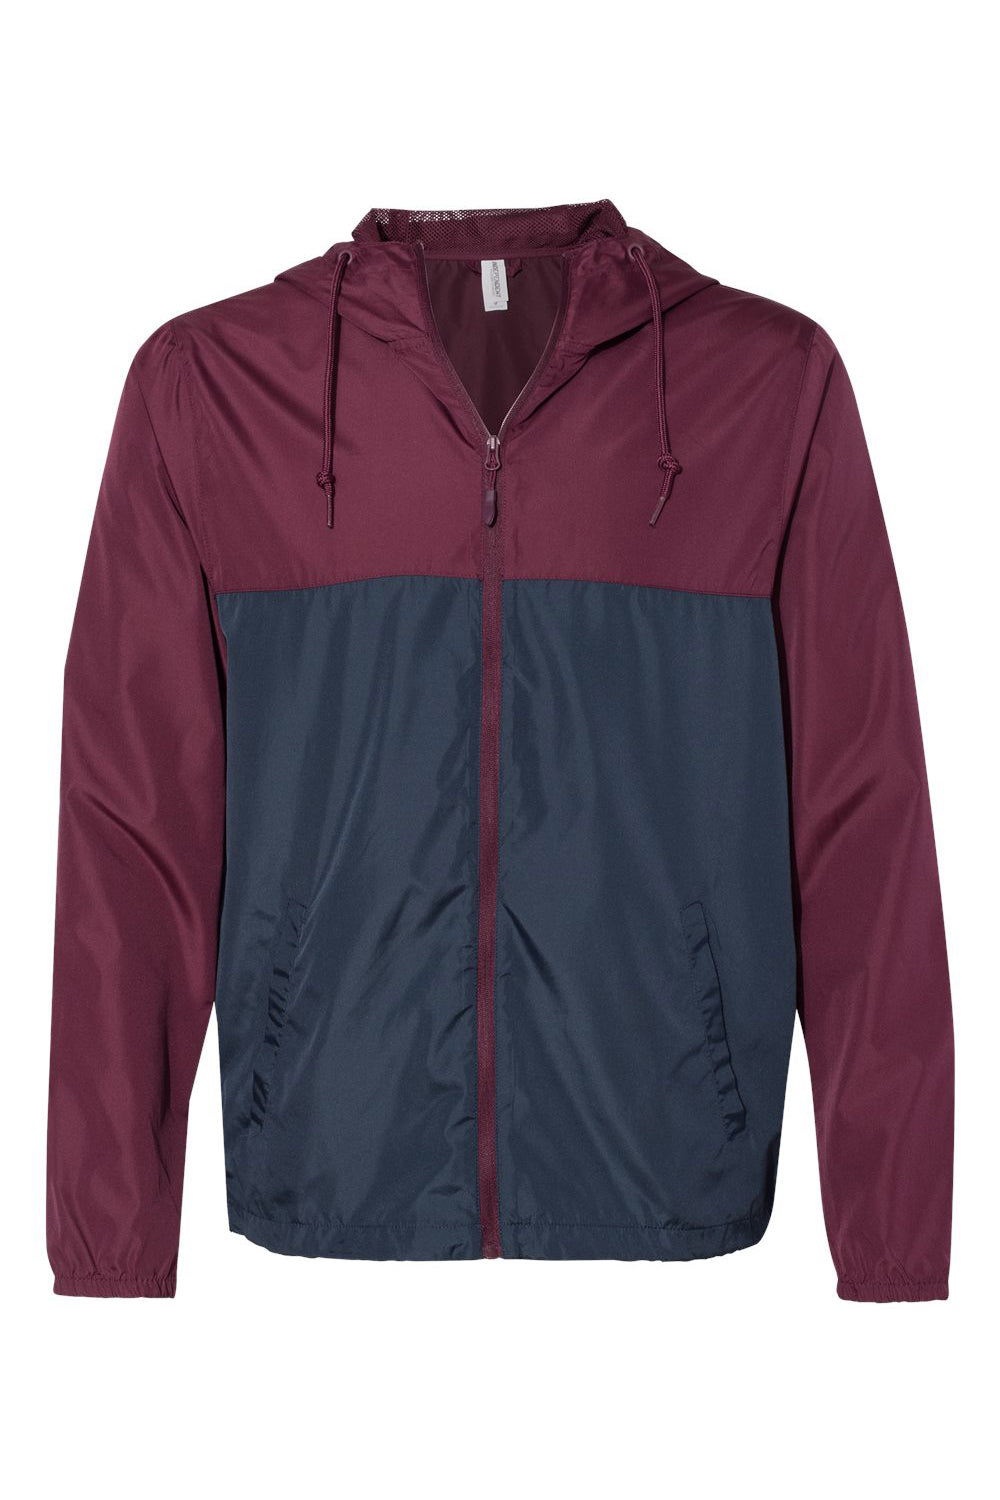 Independent Trading Co. EXP54LWZ Mens Full Zip Windbreaker Hooded Jacket Maroon/Classic Navy Blue Flat Front